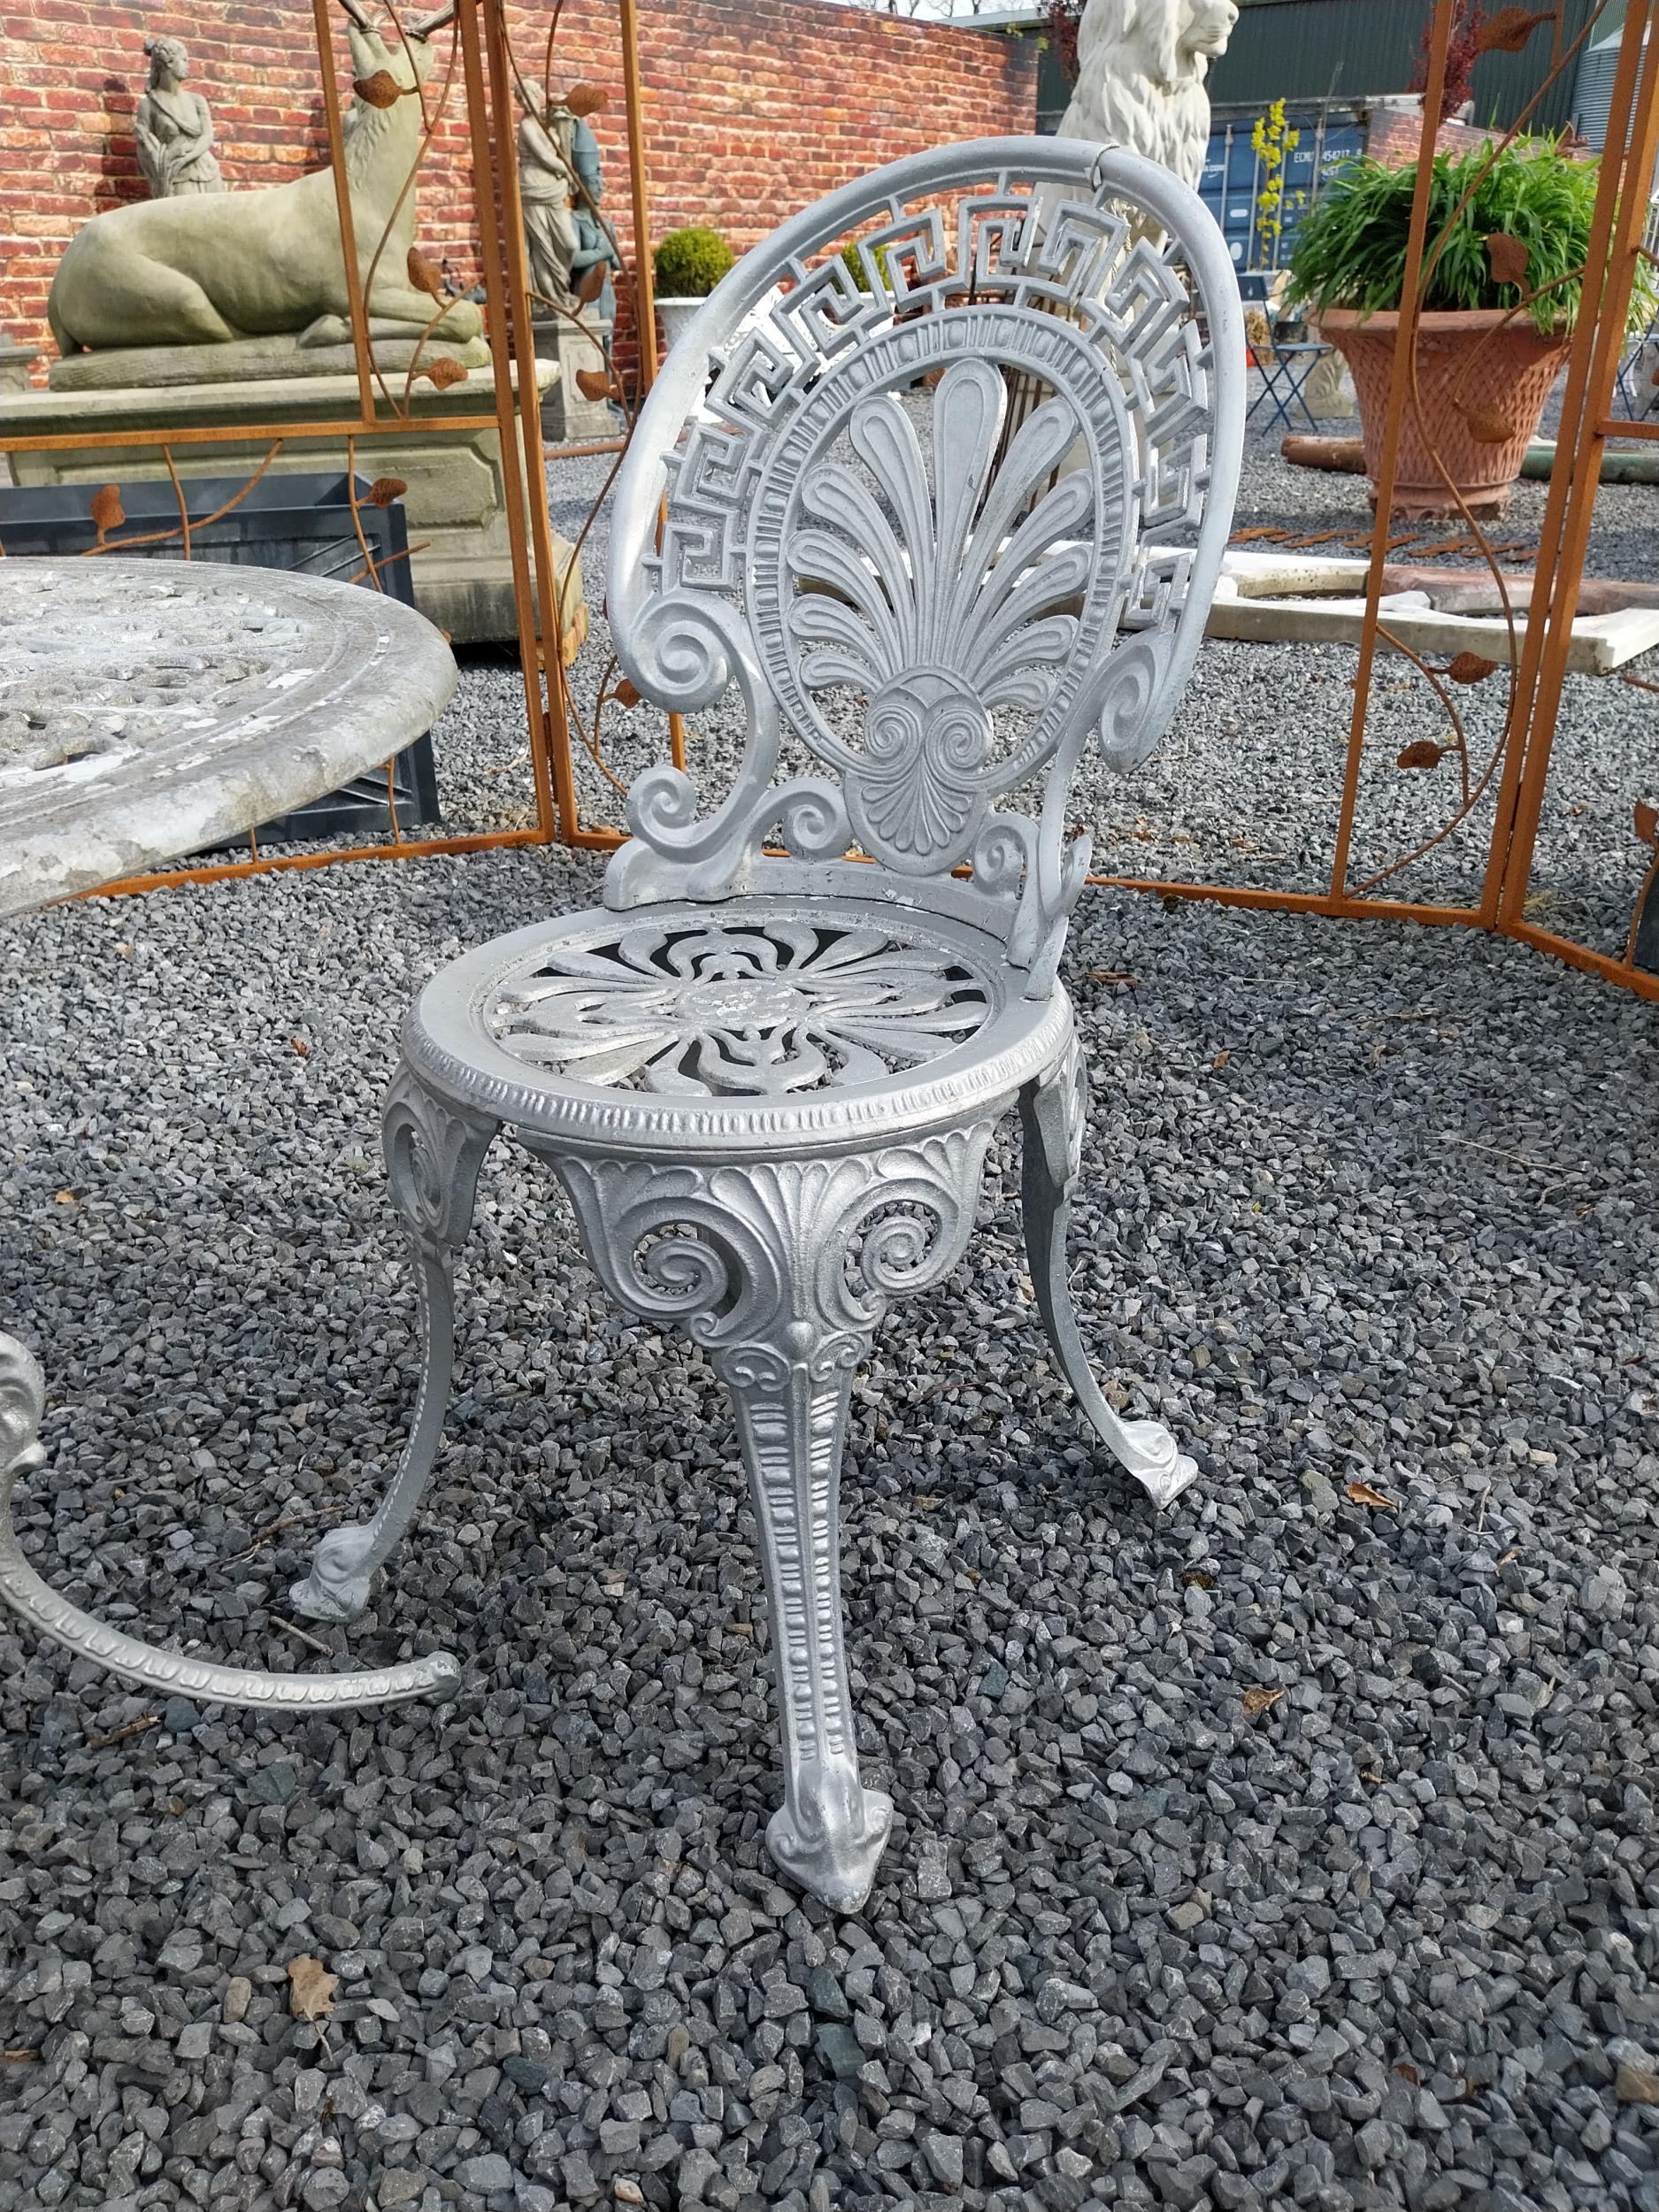 1950s cast aluminium garden table with two matching chairs {Tbl. 62 cm H x 68 cm Dia. and Chairs - Image 4 of 4